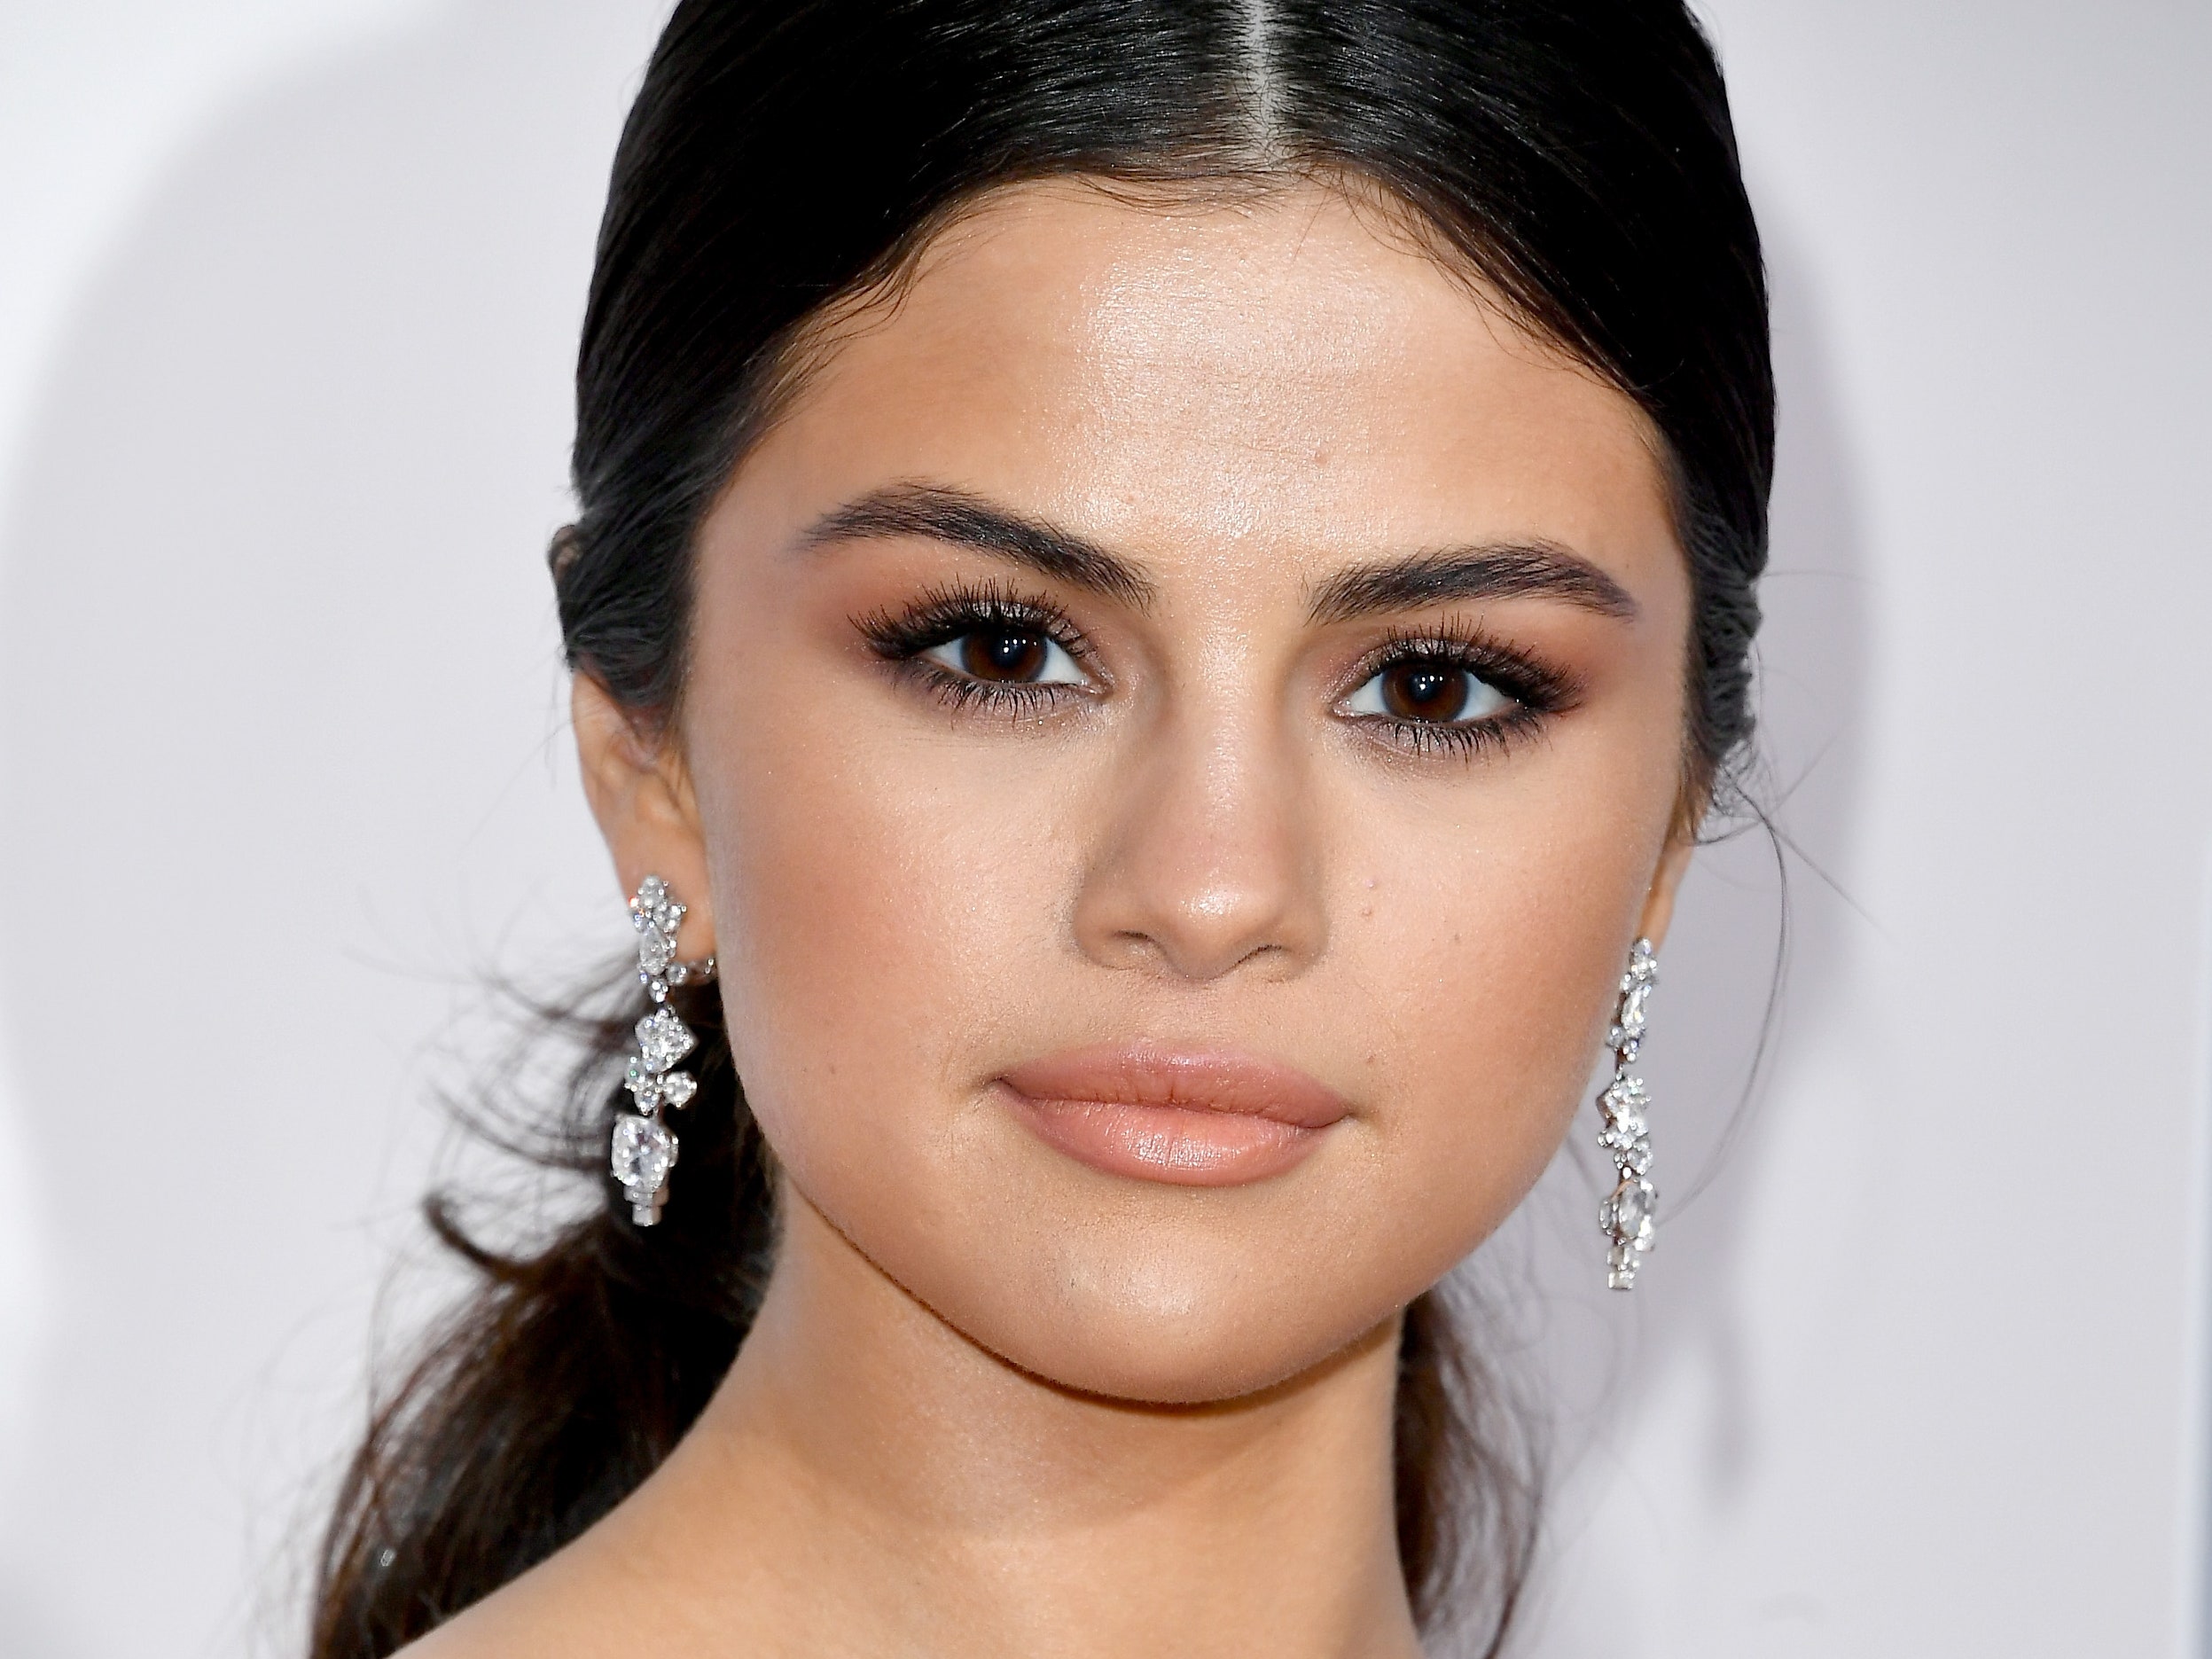 armstrong cadiz recommends selena gomez nude 2016 pic